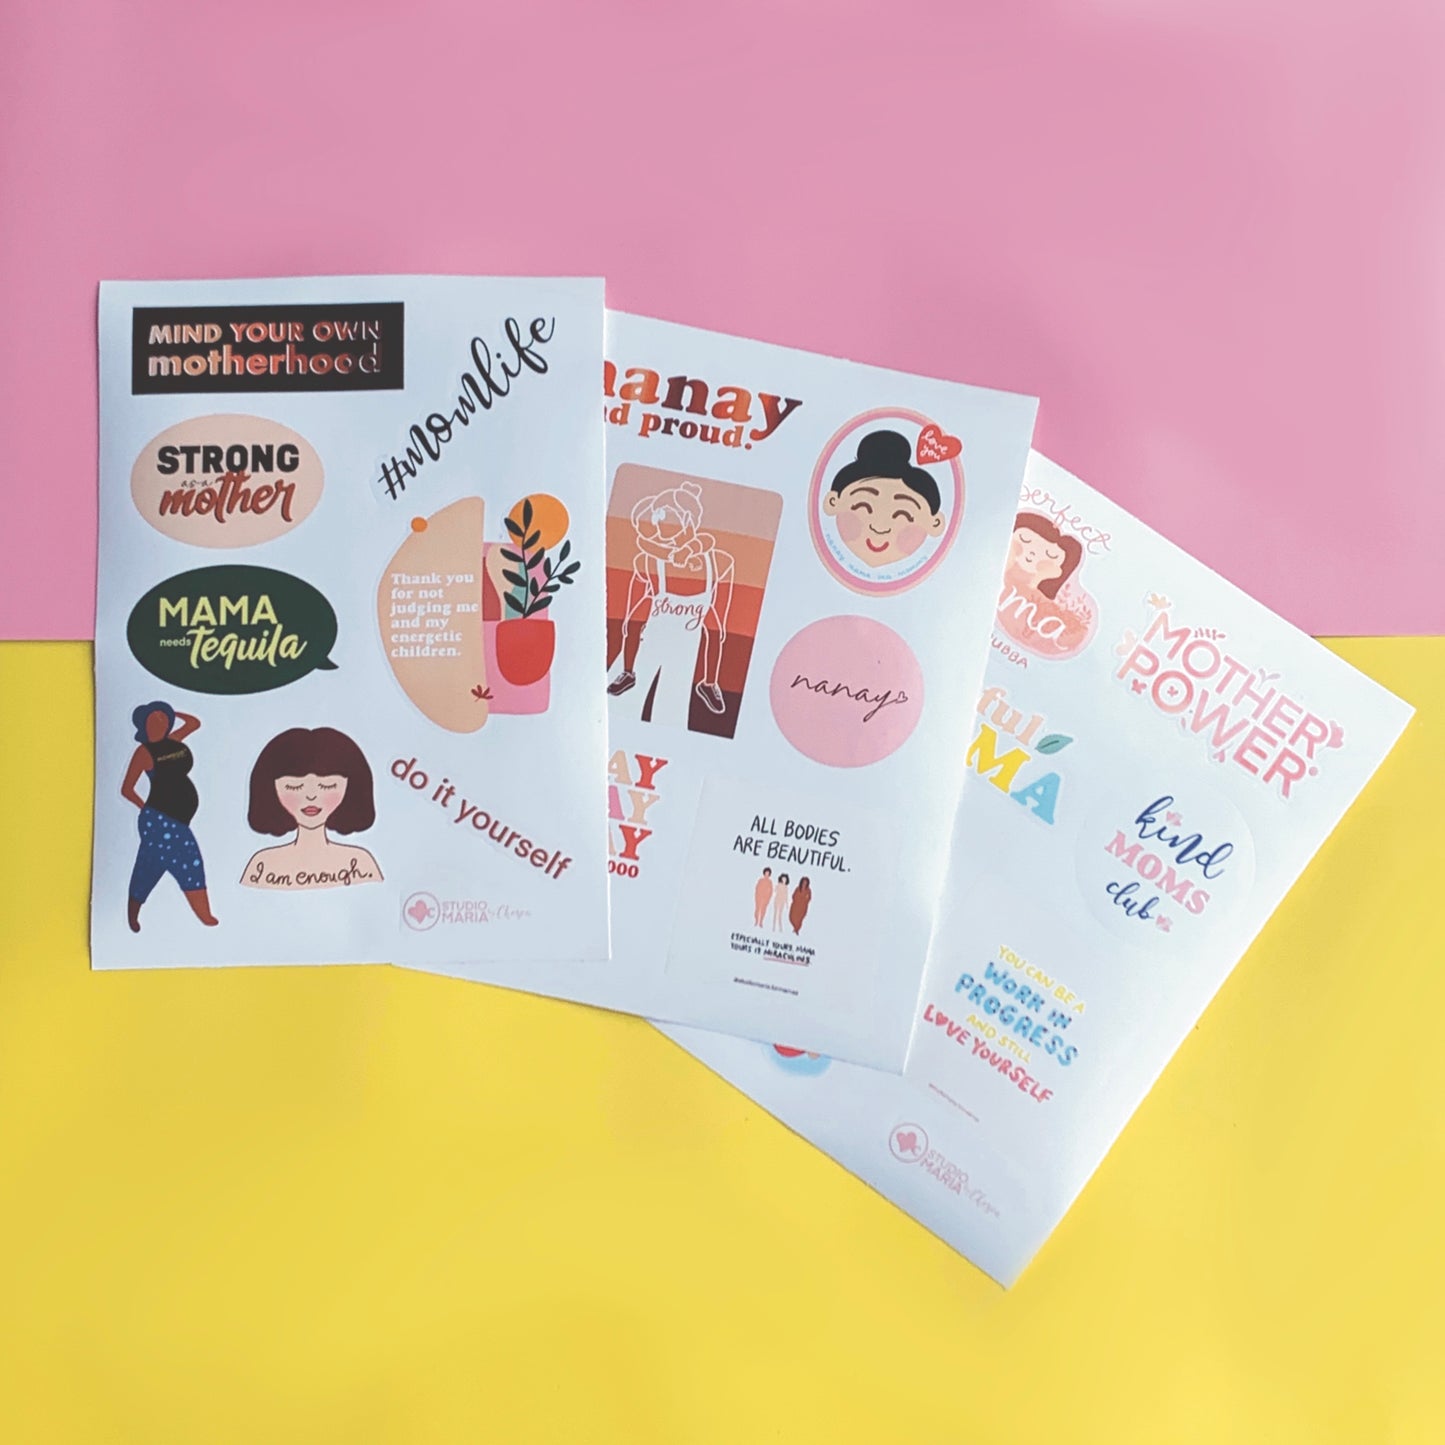 Nanay and Proud Sticker Set by Studio Maria